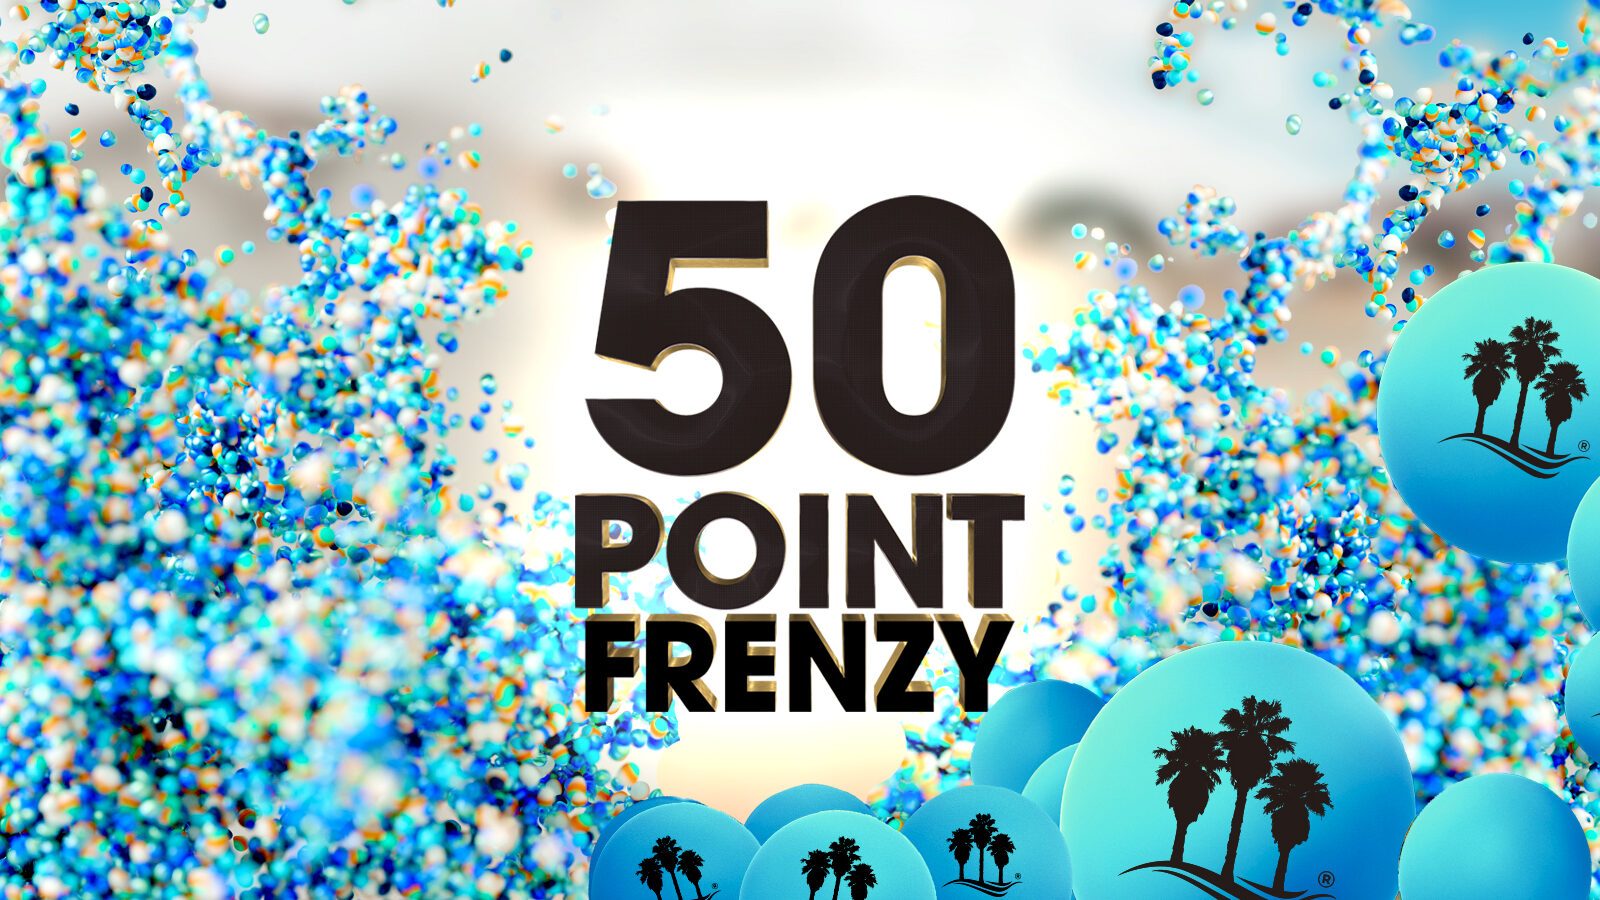 Fifty Point Frenzy Earn and Get